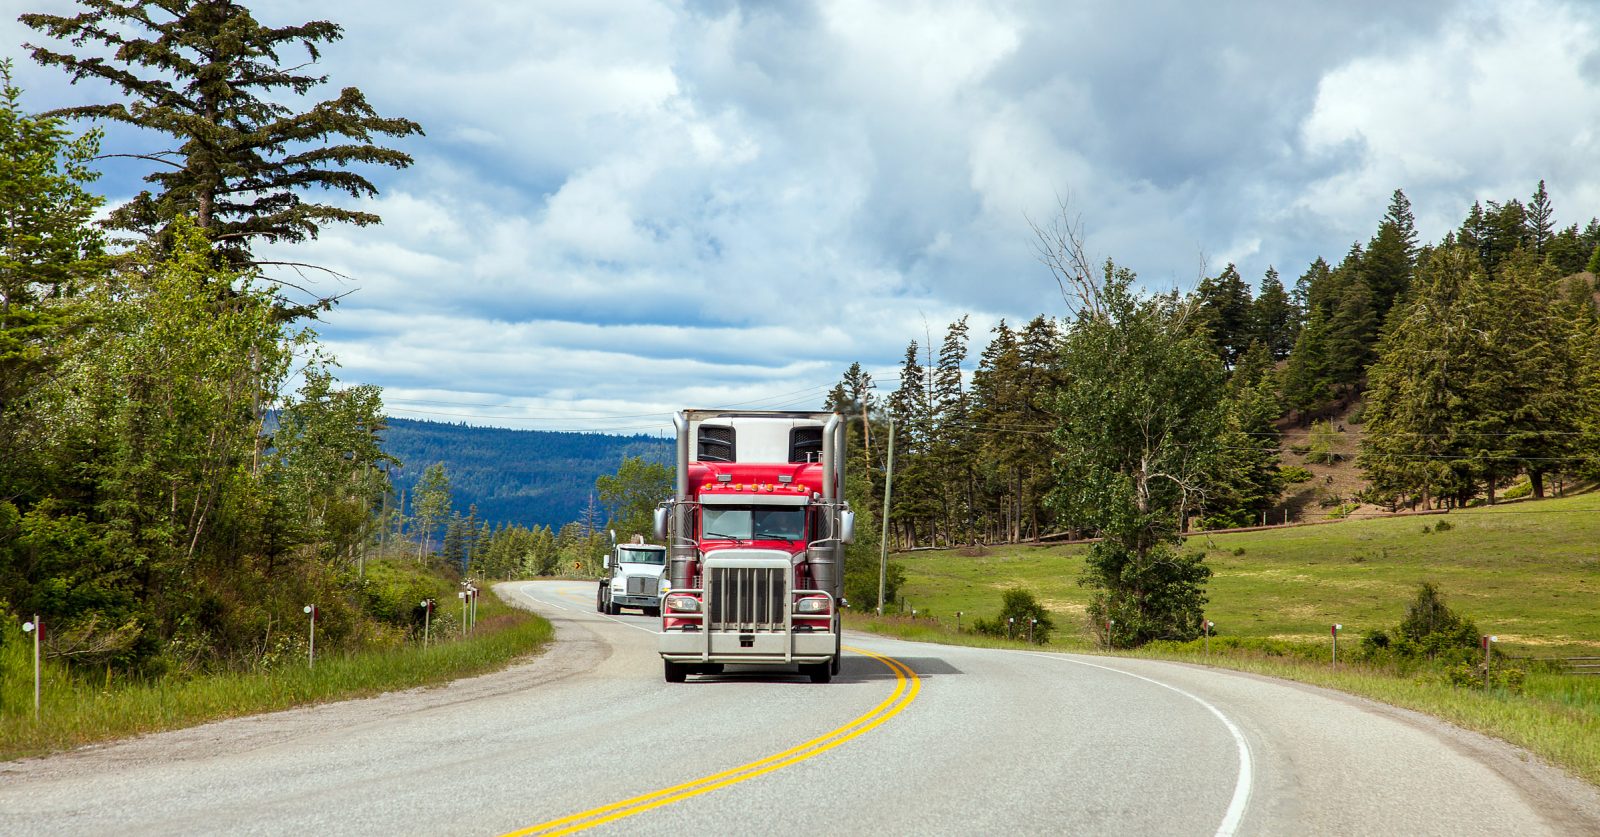 A red transport truck drives in front of a white transport truck on a bend in a road surrounded by trees.